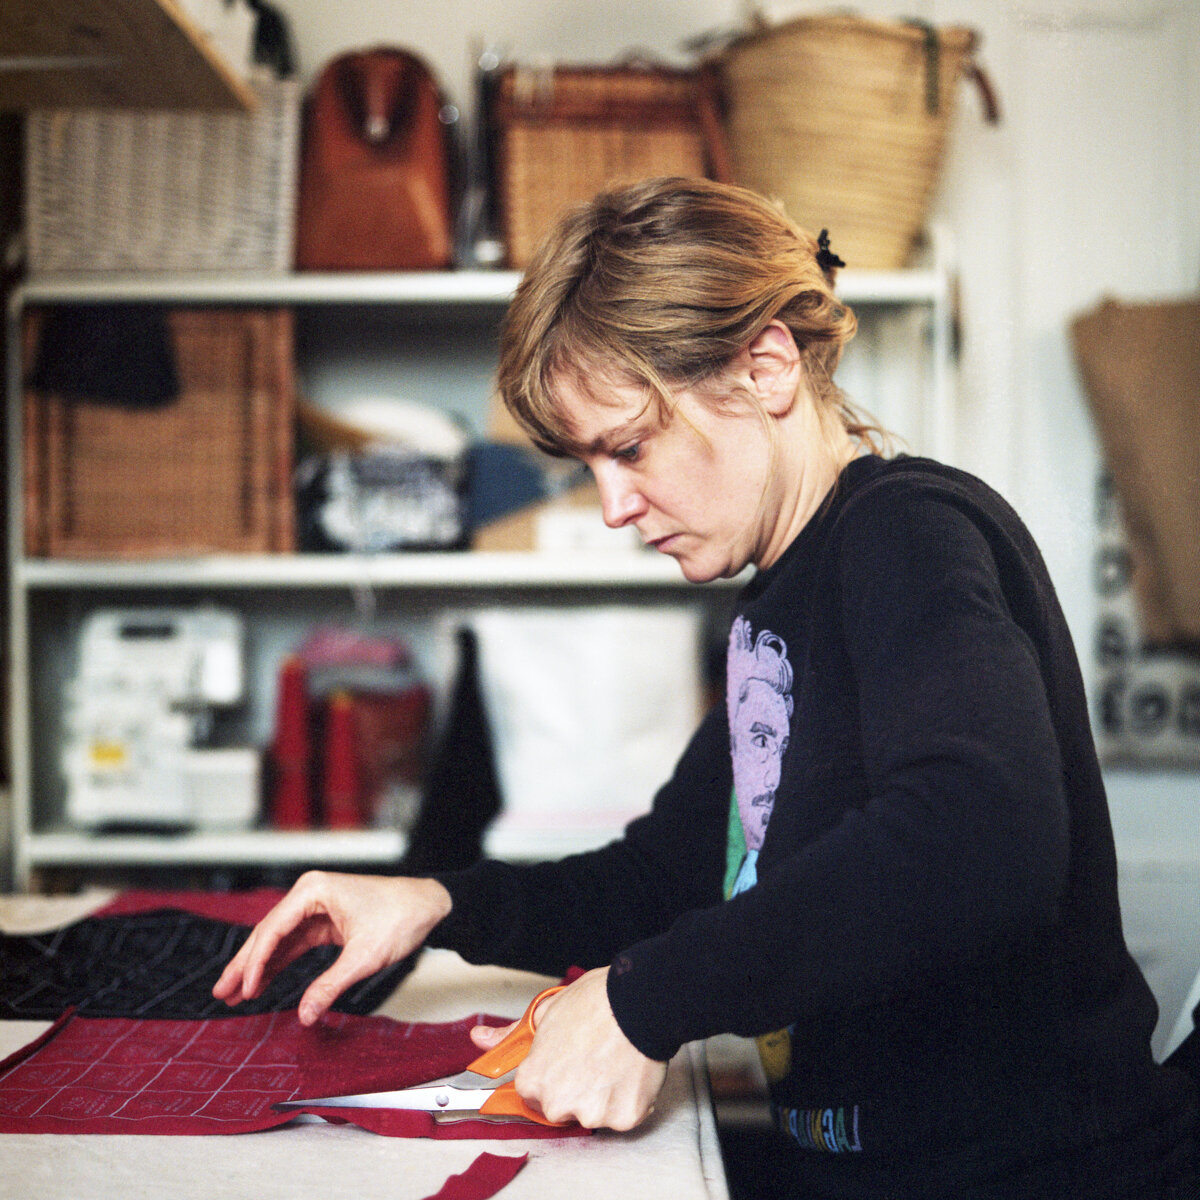 Clothing designer Perrine Hurrel (Bunny and Claude) cuts red and black undergarments in her home studio in Montréal, Canada.